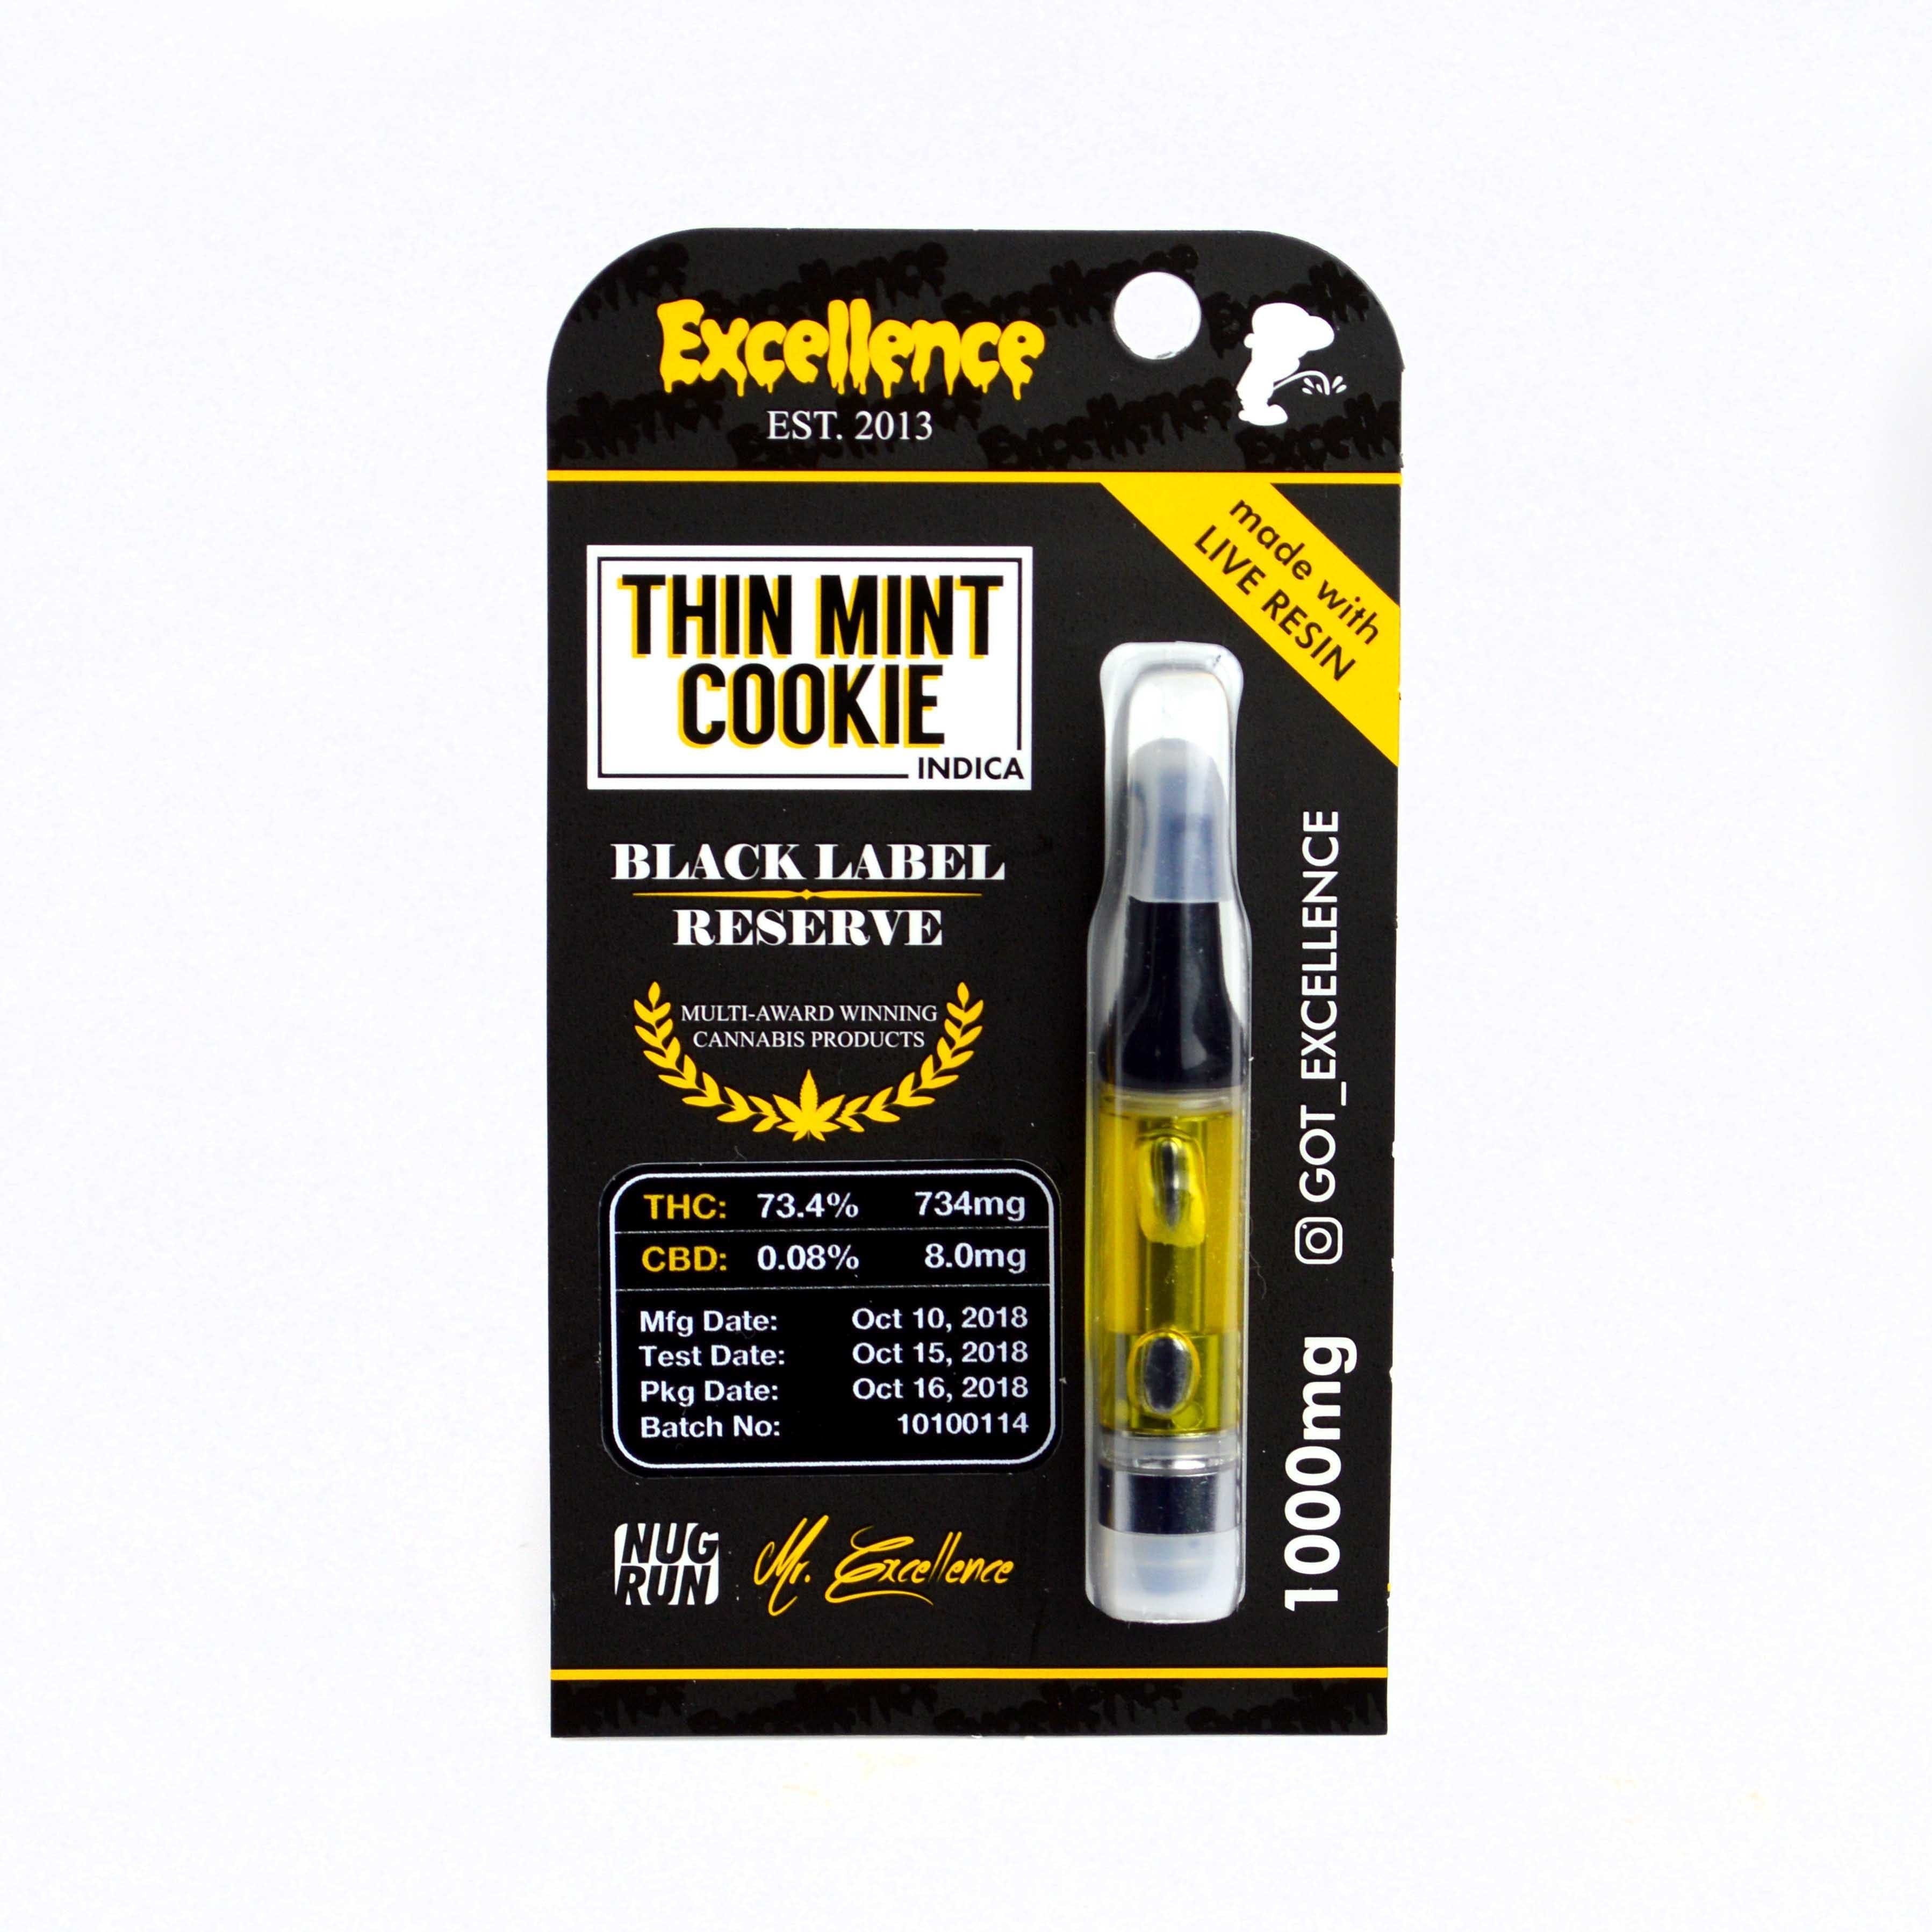 concentrate-excellence-thin-mint-cookie-black-label-reserve